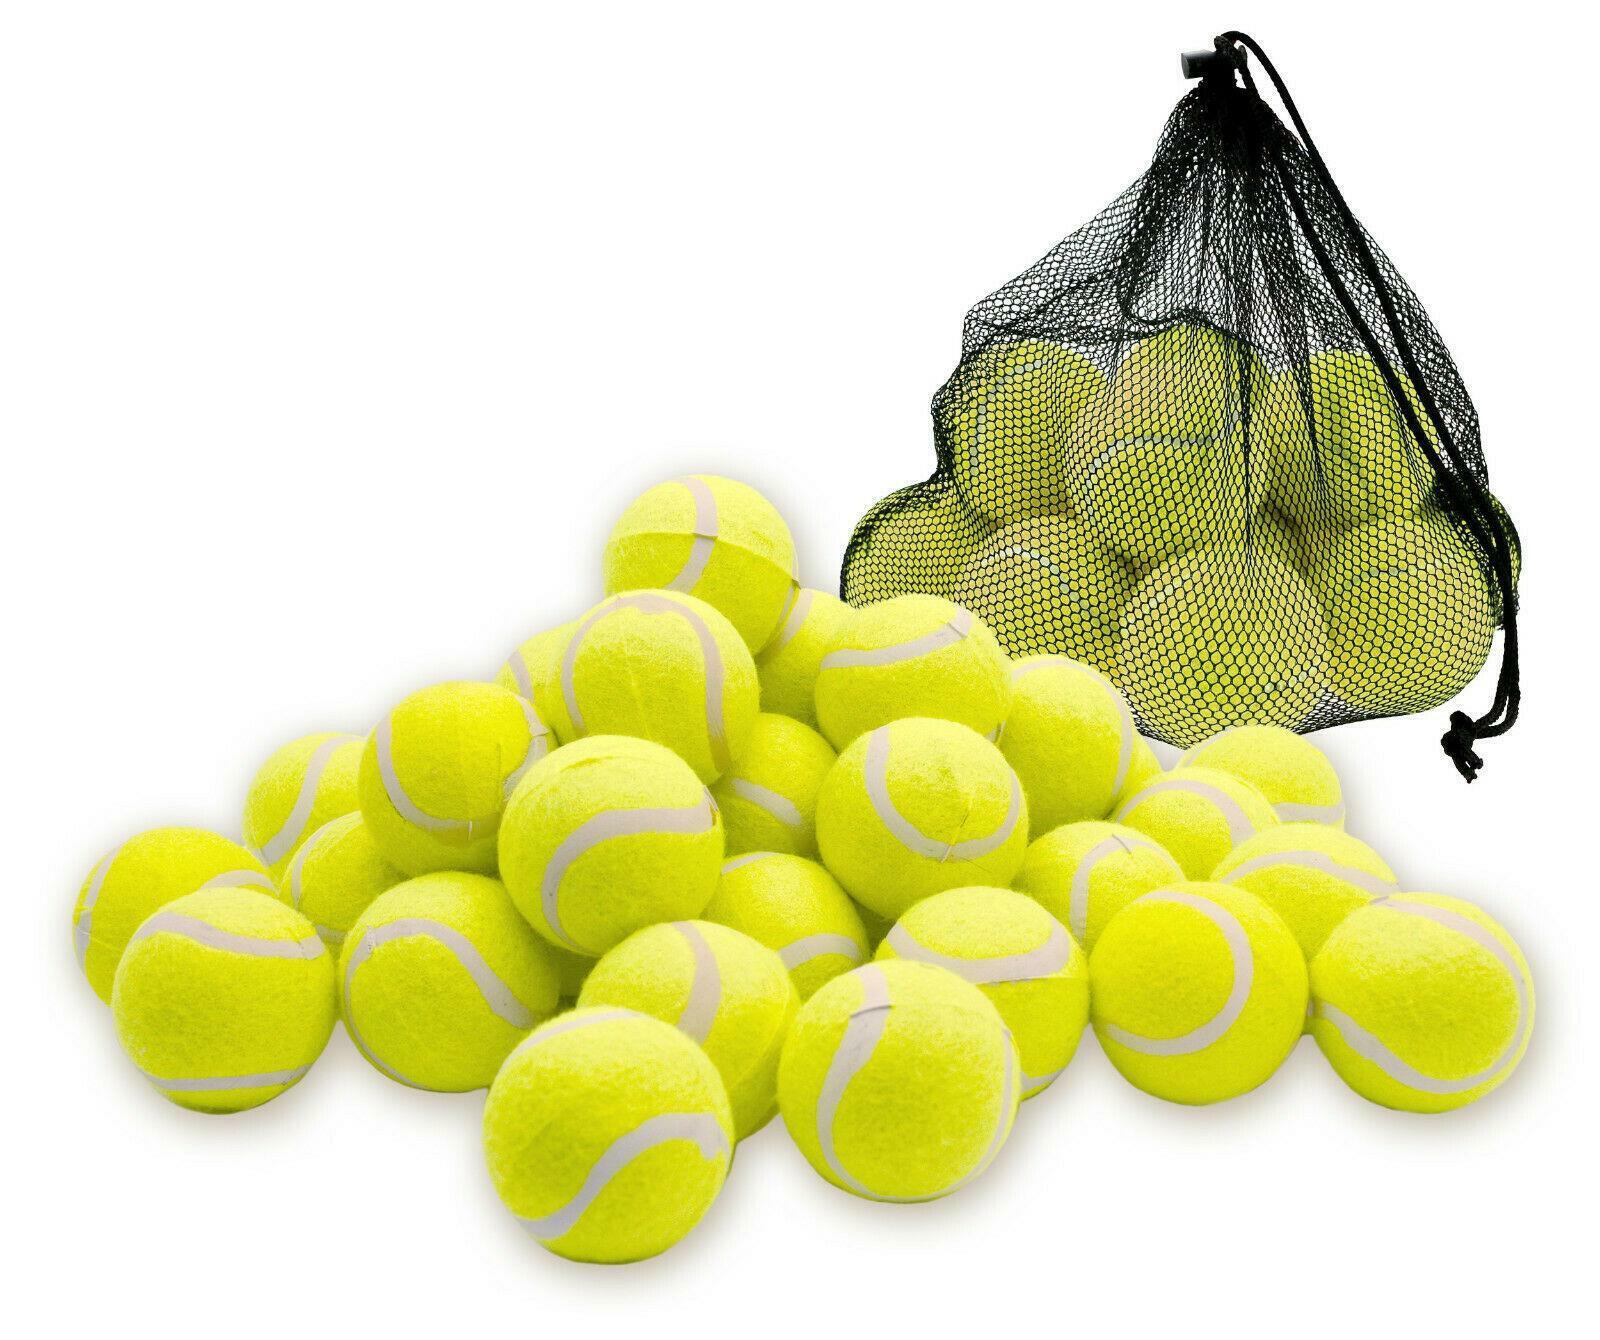 Pack of 24 Tennis Balls Sports Summer Outdoor Garden Beach Leisure Fun Cricket Dog Training Ball Game Toy with Pouch